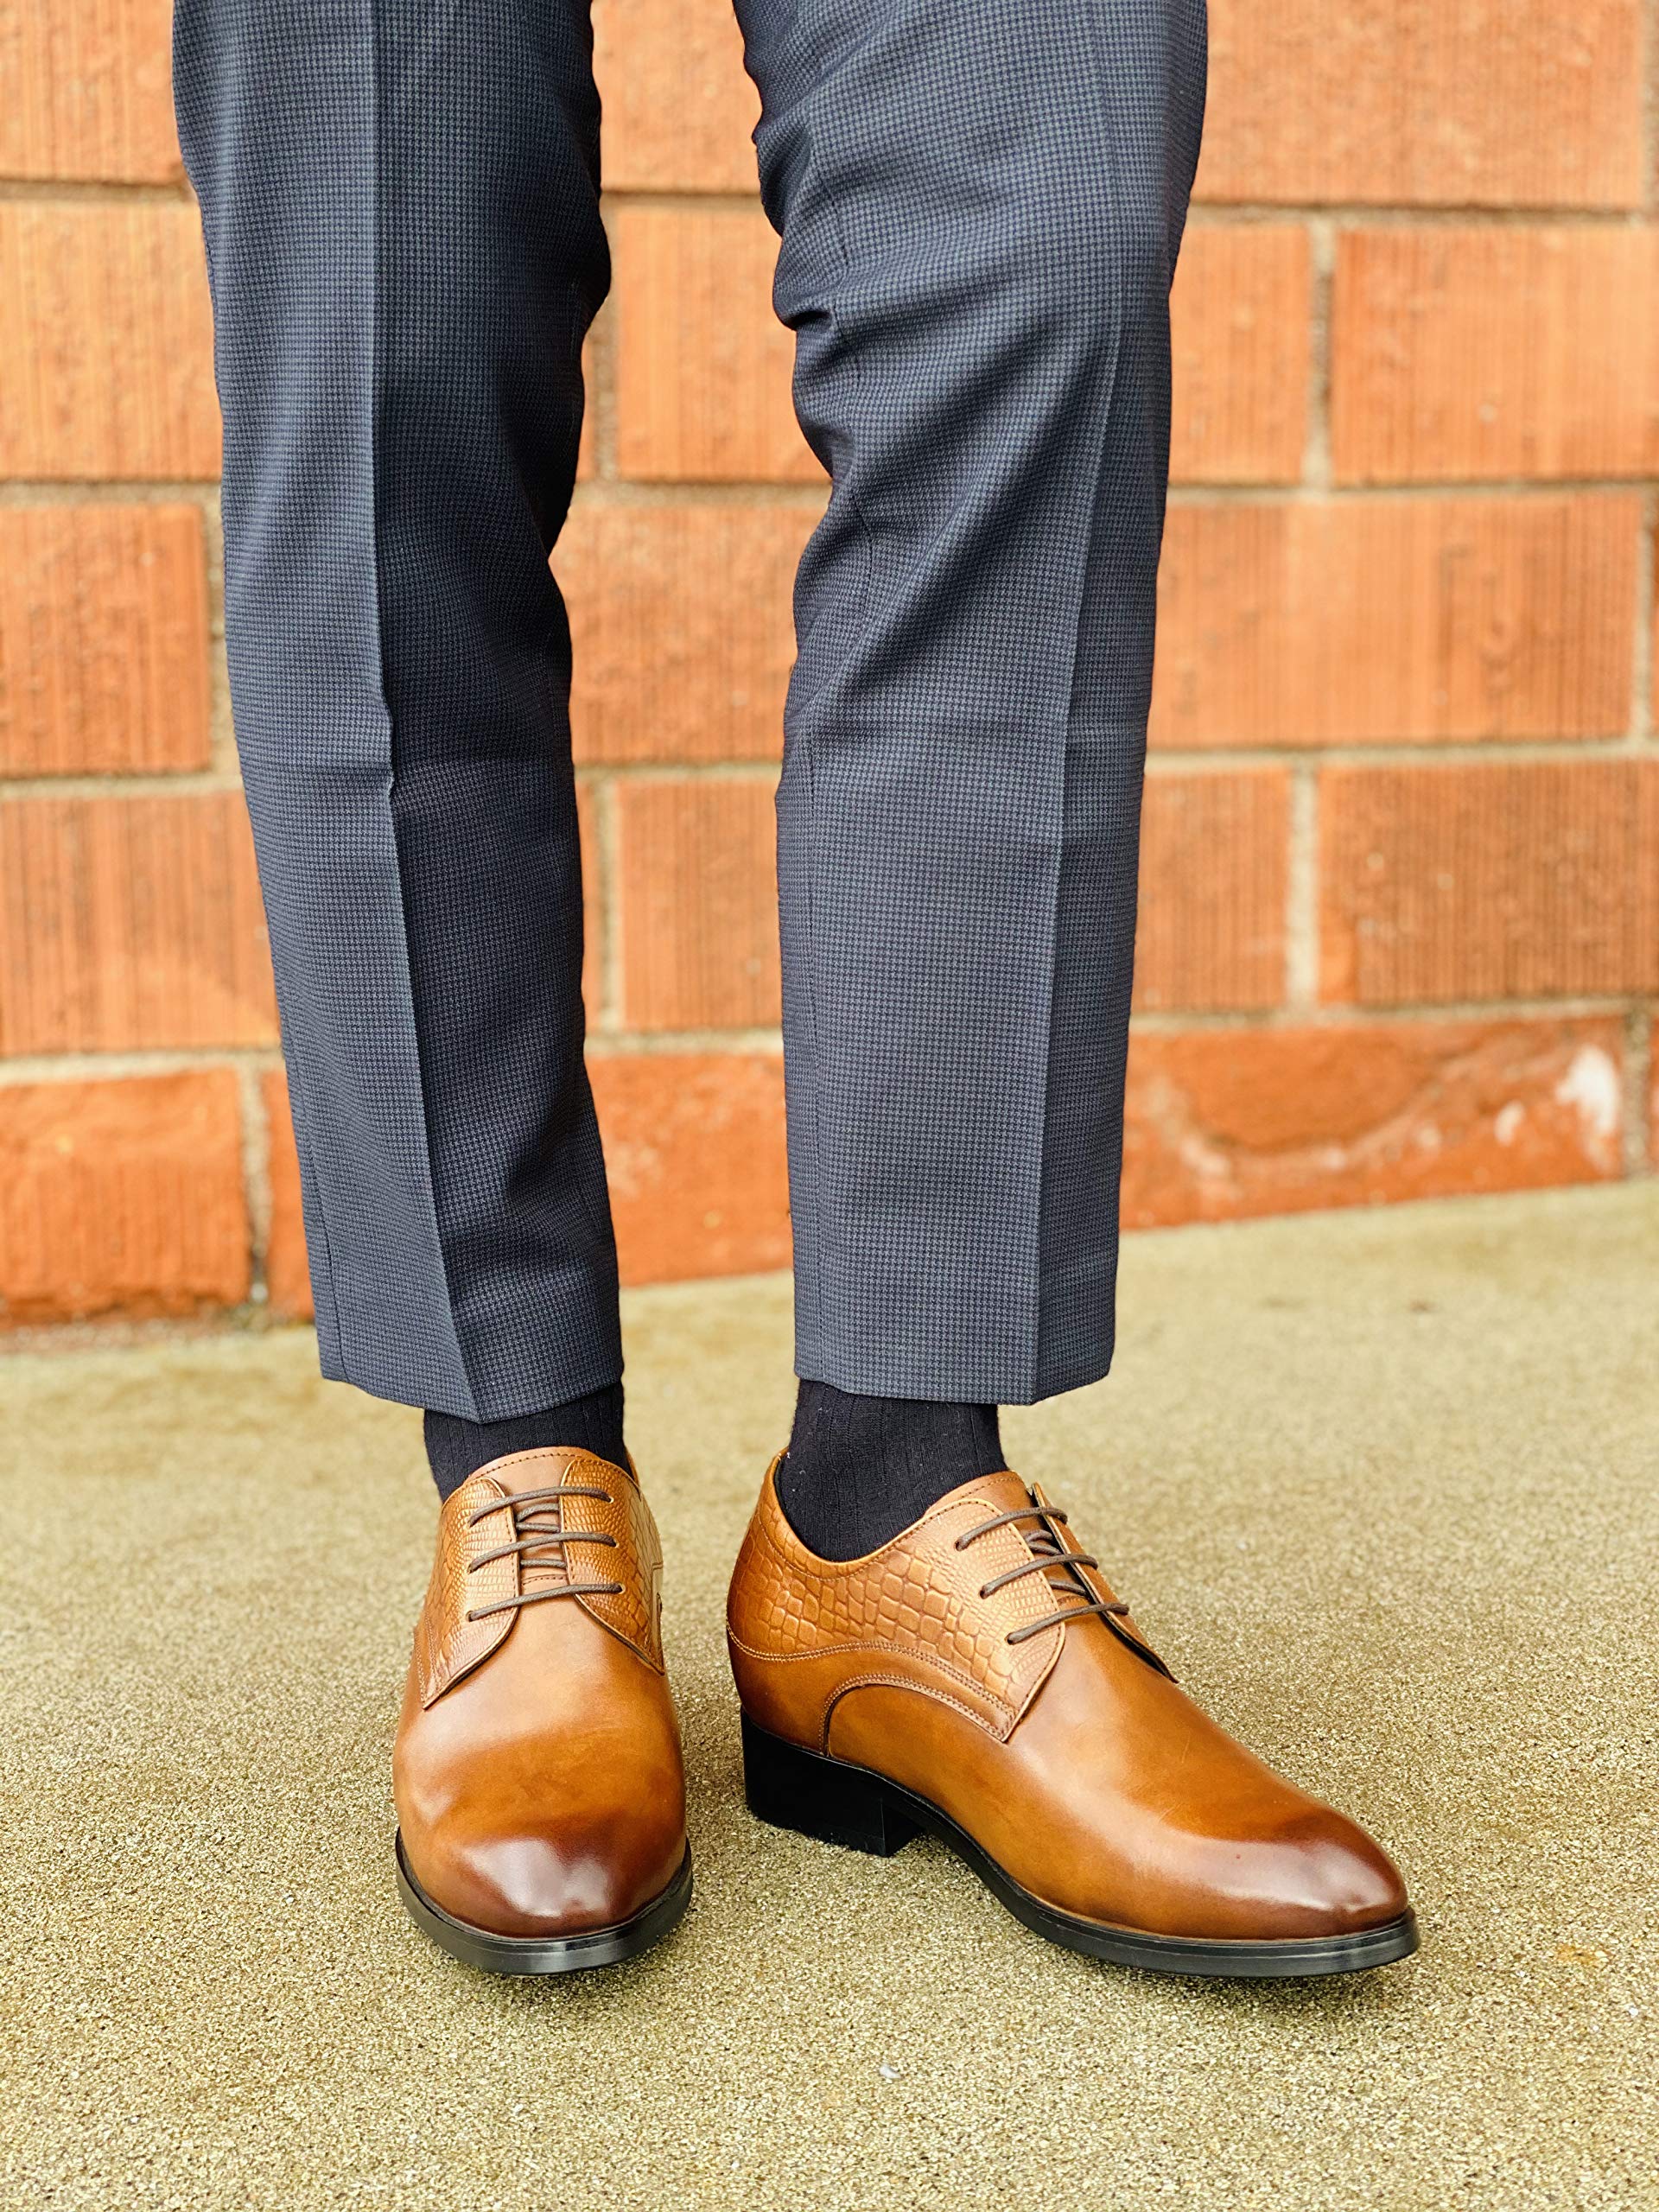 CALTO Height Increasing Elevator Shoes 3 Inches Taller - Leather Dress Shoes - Men Invisible Elevated High Heels Oxfords